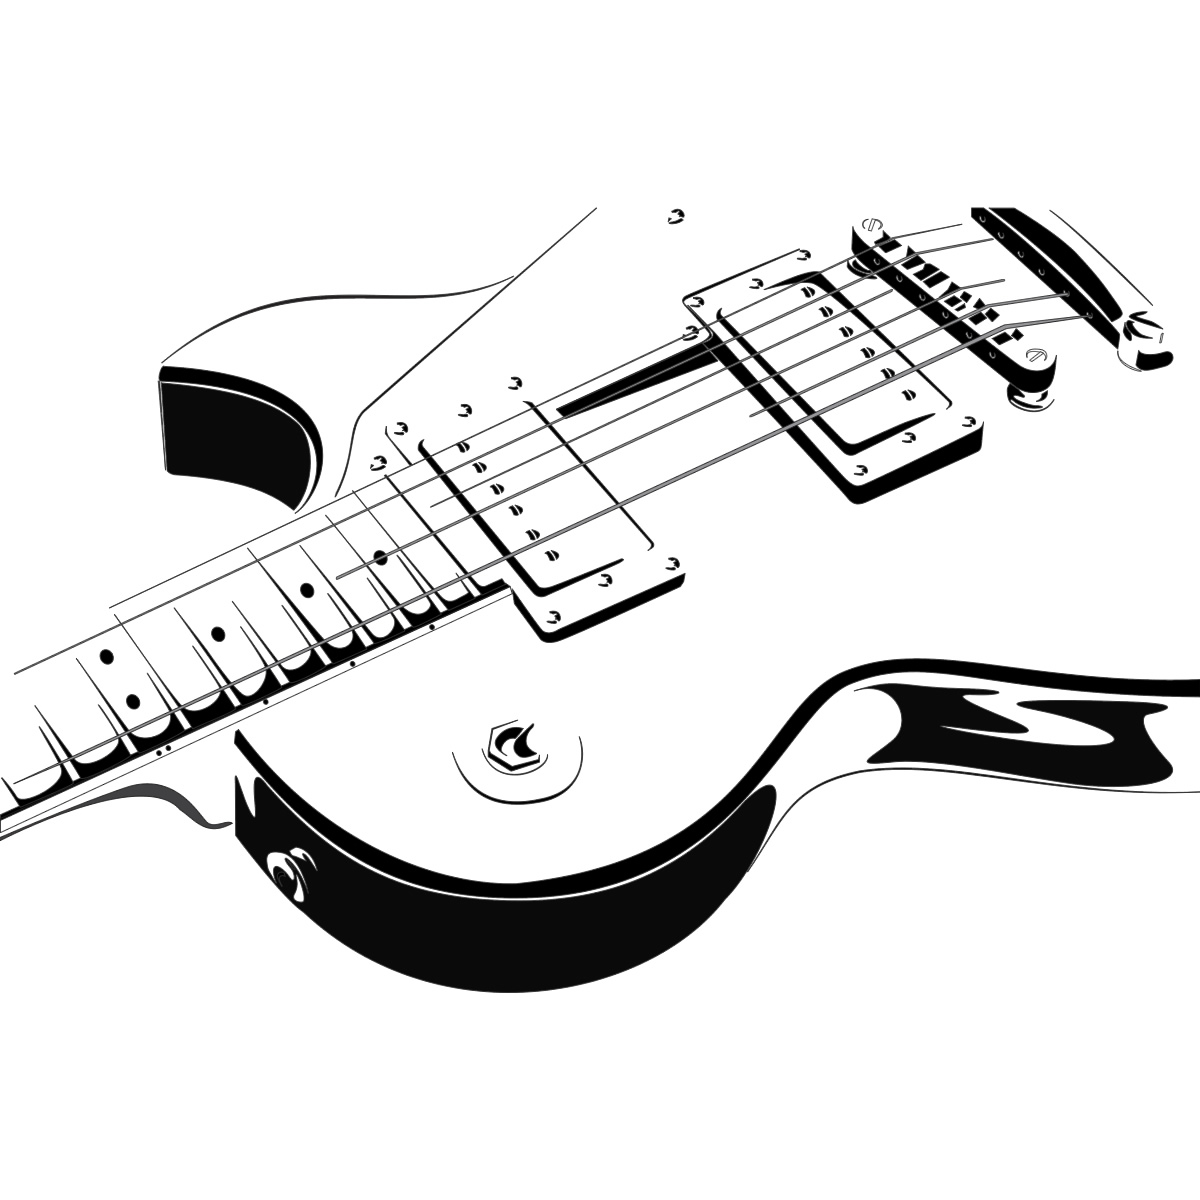 Electric Guitar Wall Art Decals Wall Stickers Transfers | eBay